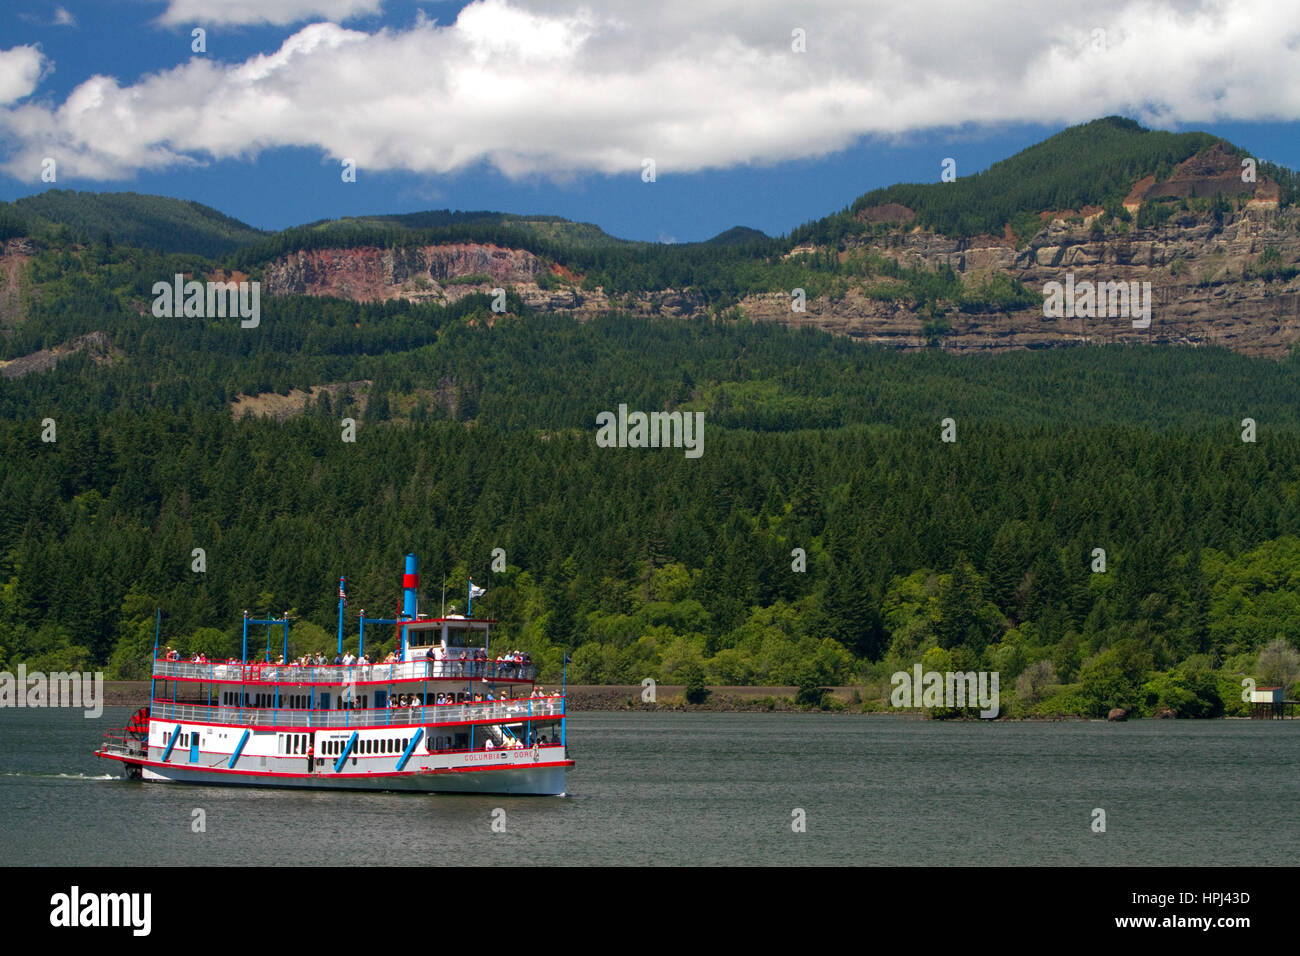 Sternwheeler Columbia Gorge giving a sightseeing cruise on the Columbia River at Cascade Locks, Oregon, USA. Stock Photo